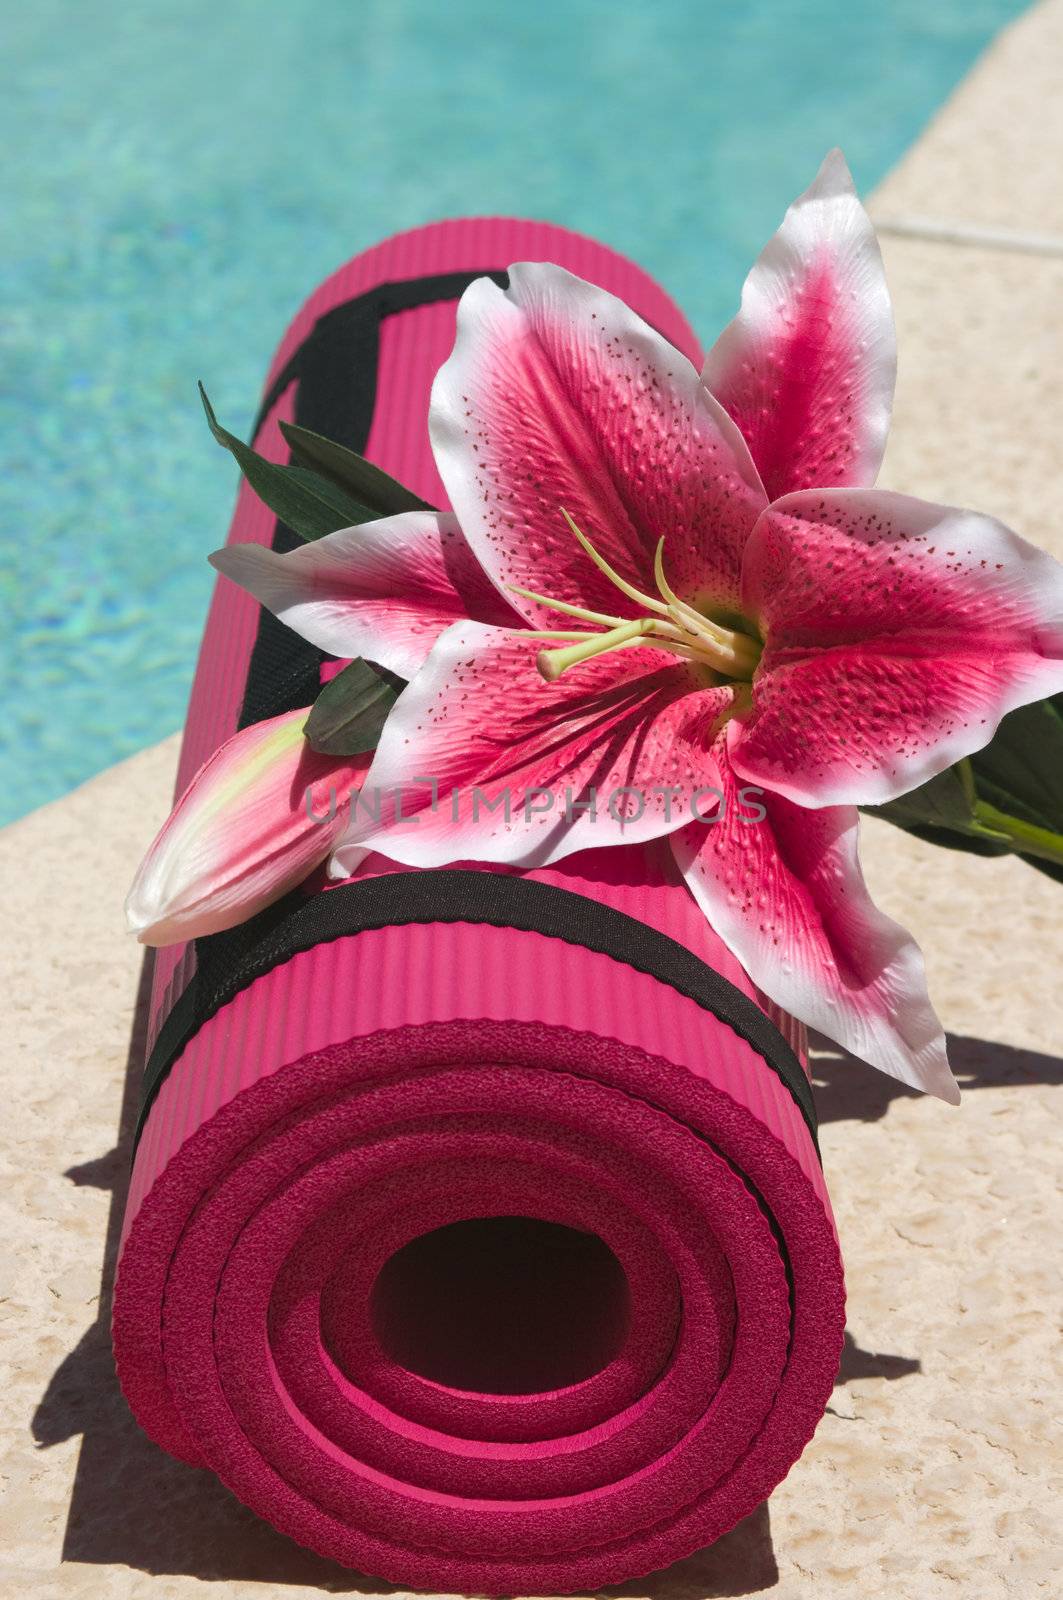 Yoga mat and a beautiful lily near a pool